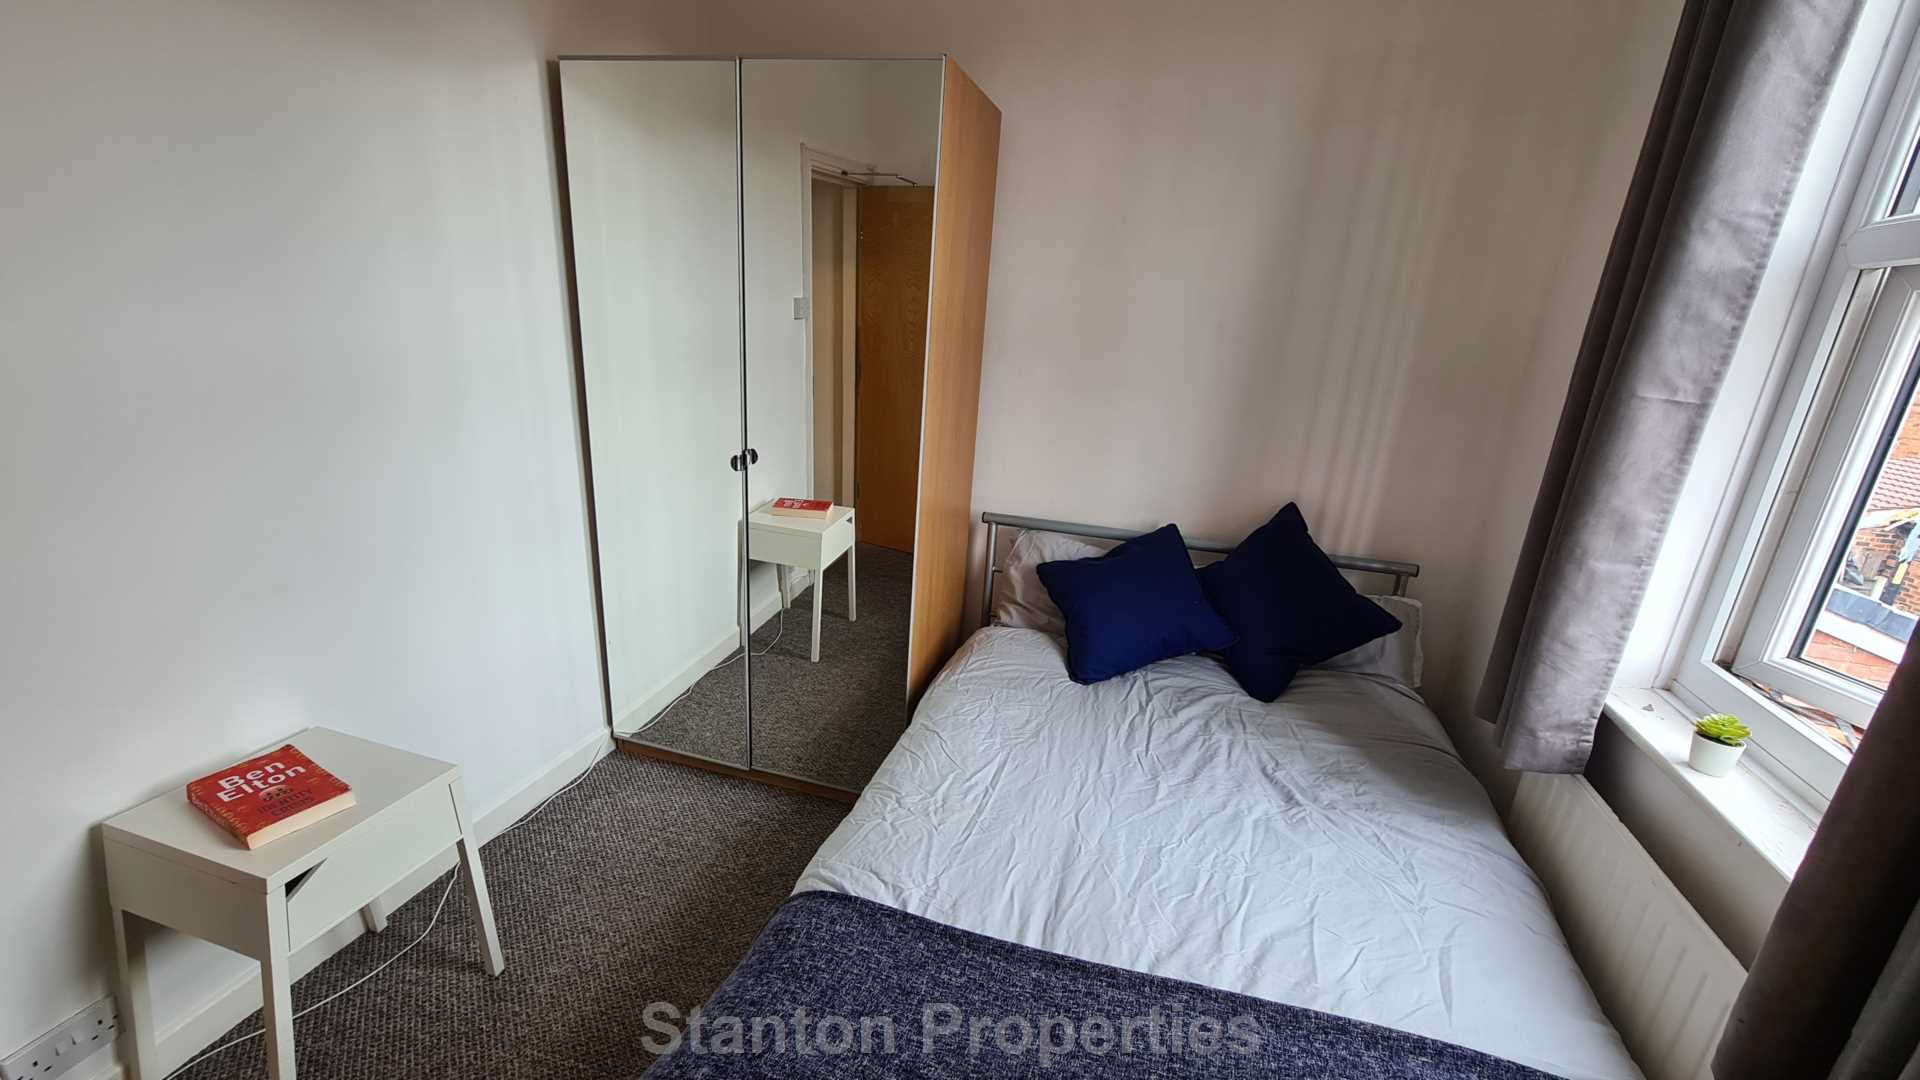 £130 pppw, See Video Tour, Mabfield Road, Fallowfield, Image 20